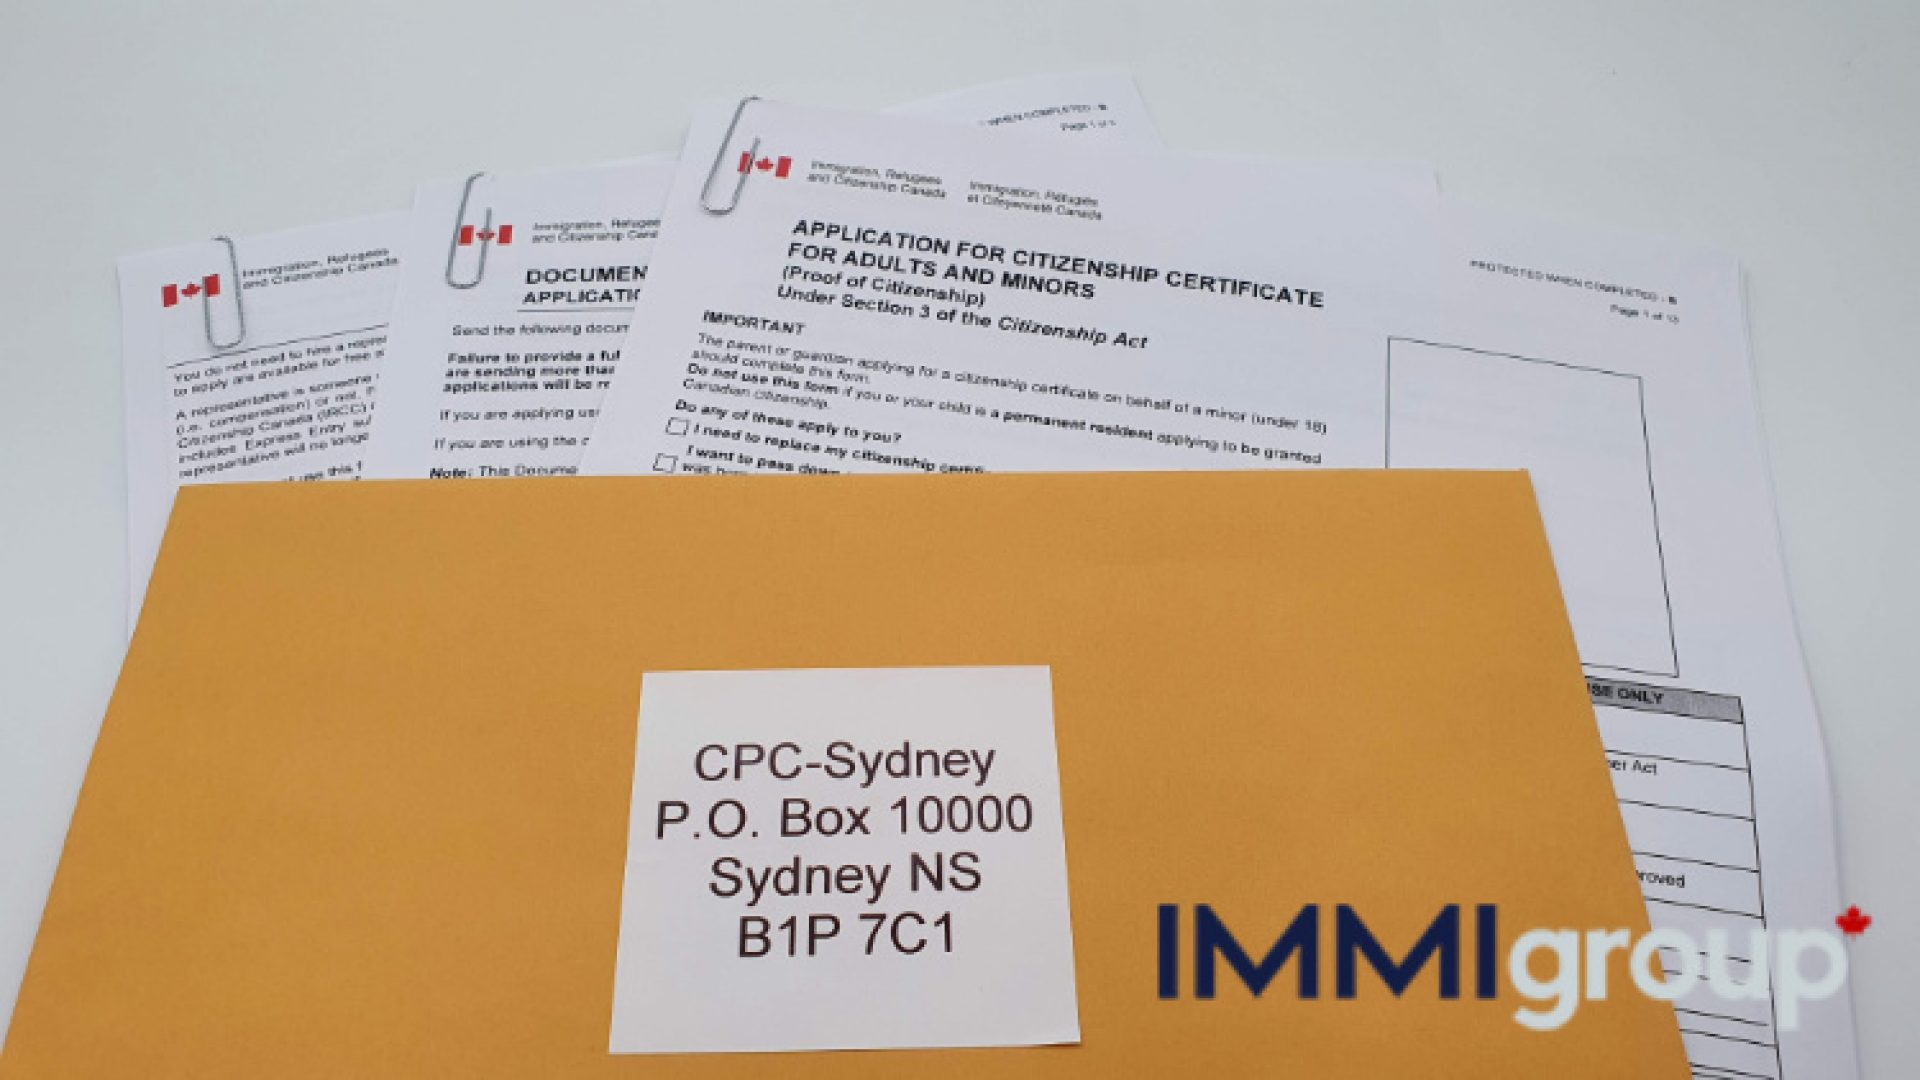 application for citizenship certificate kit and envelop